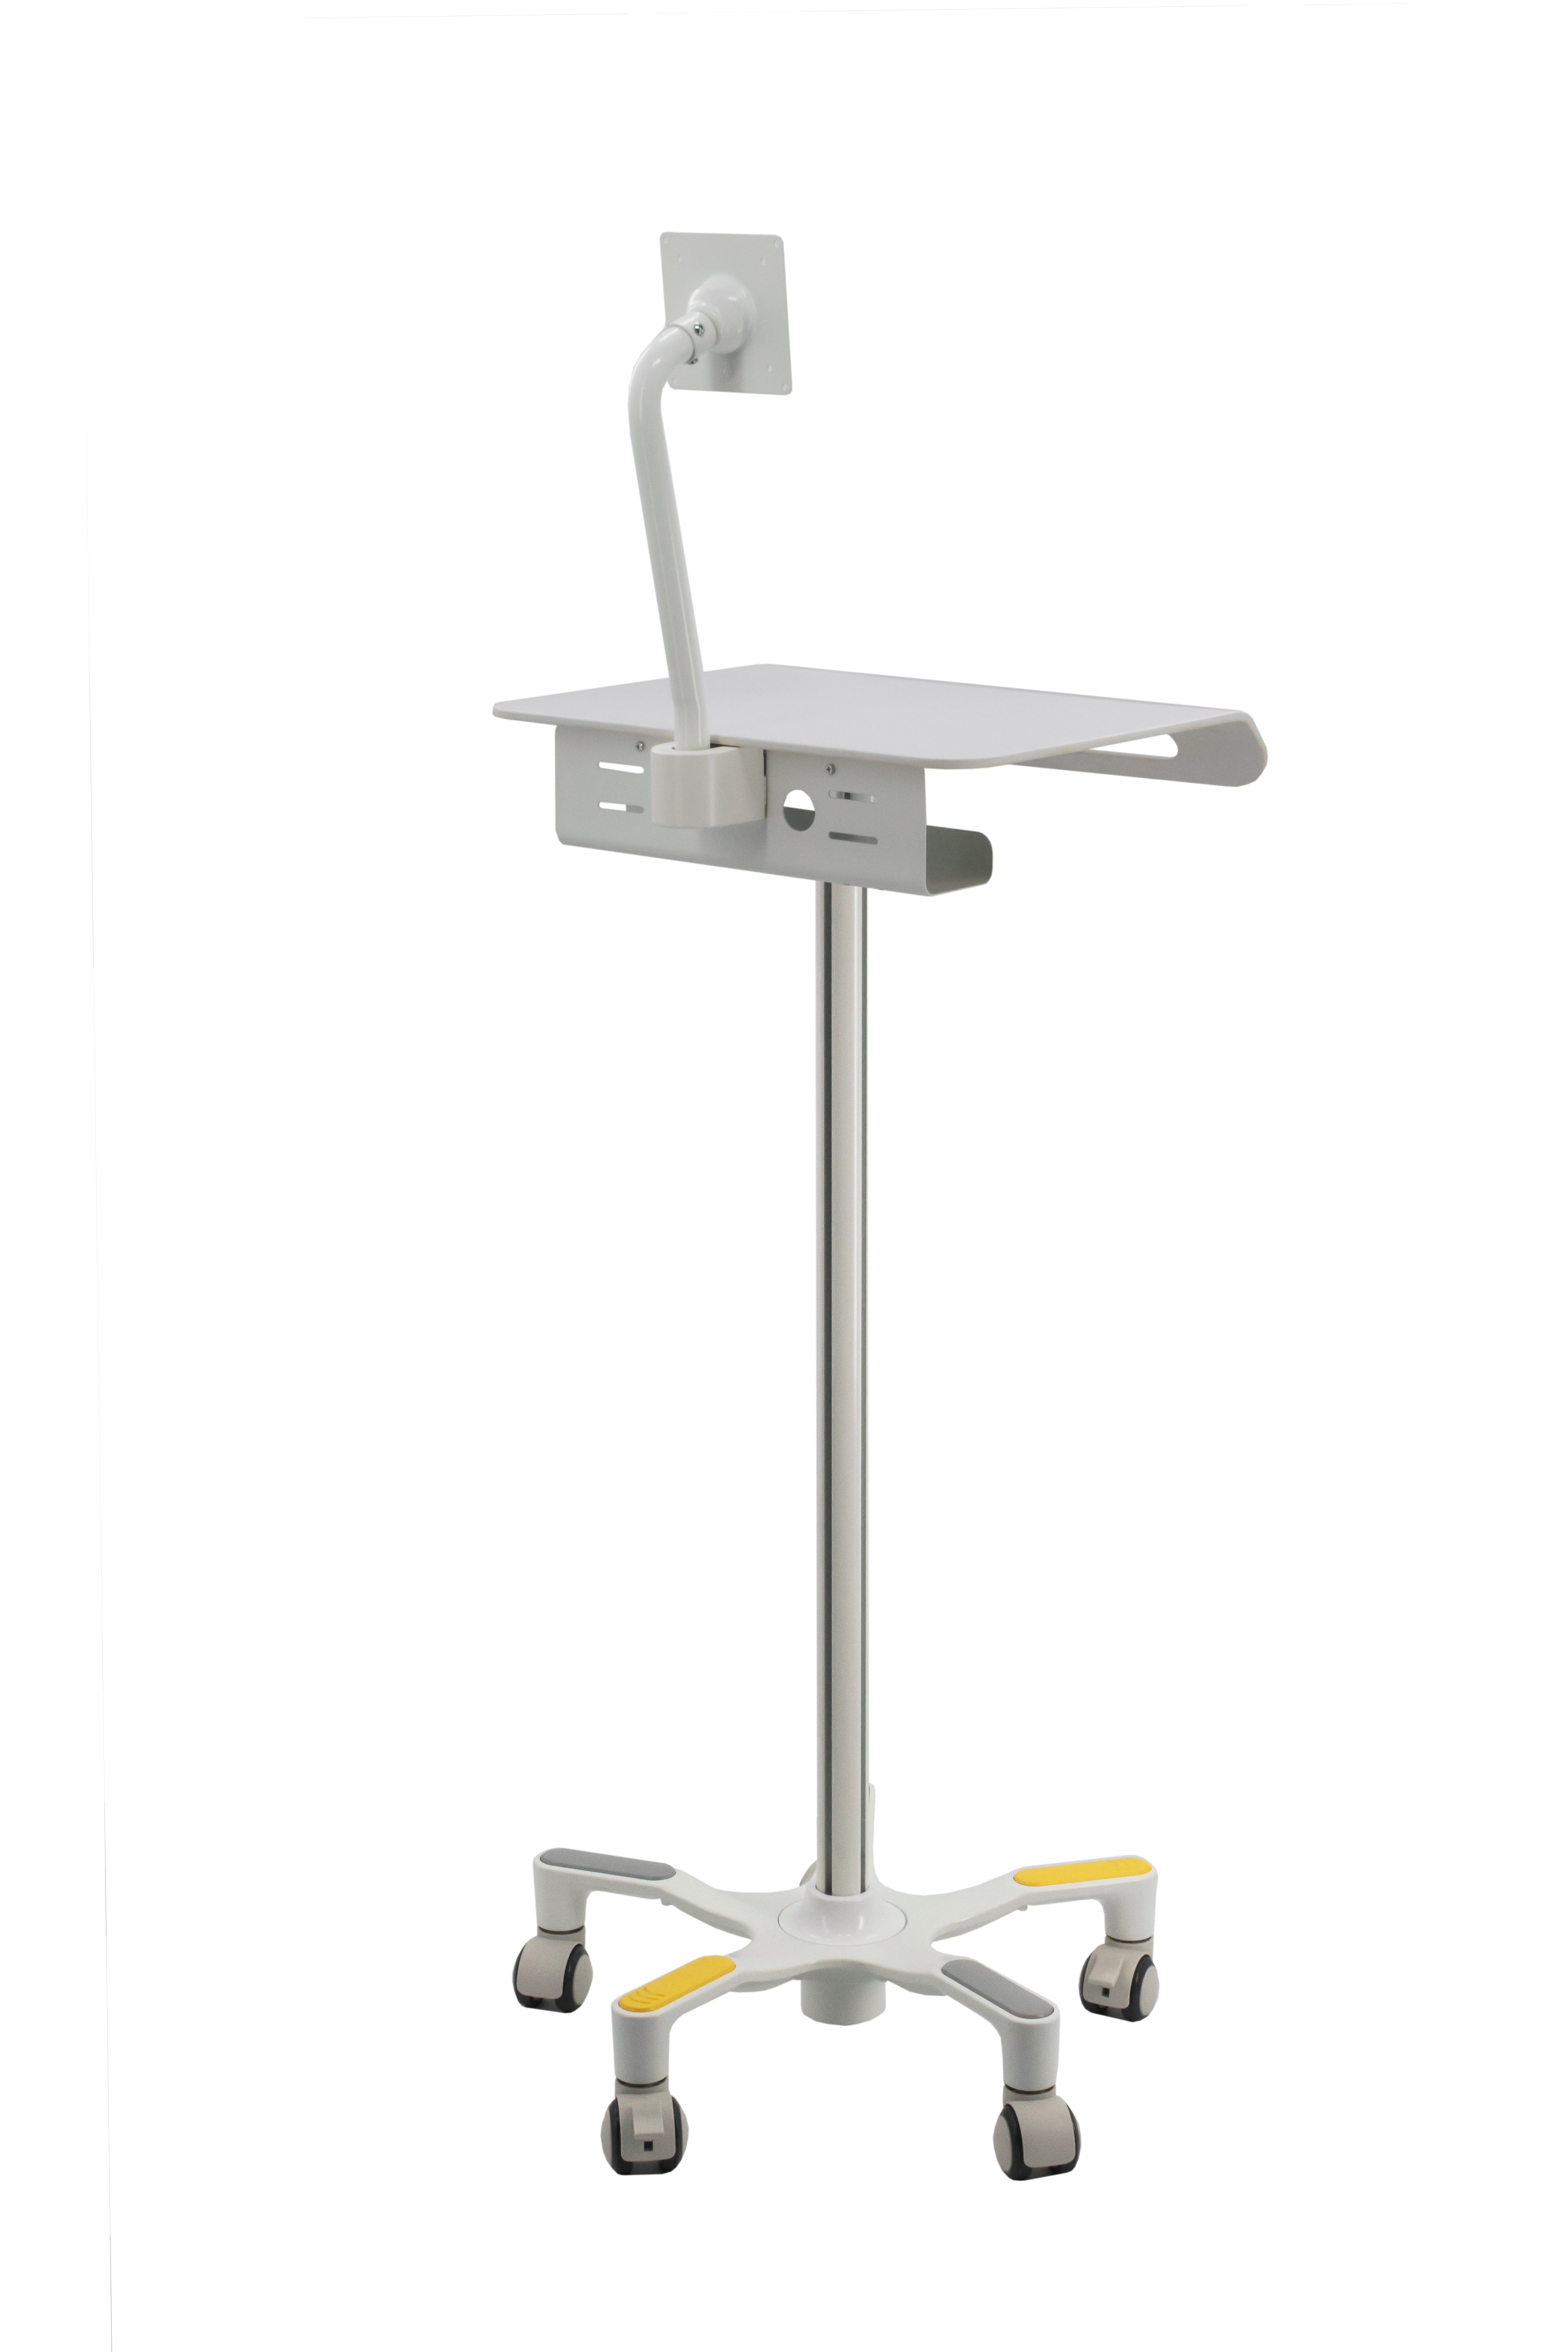 Medical Grade Anti-Microbial Floor Stand with VESA Compatibility